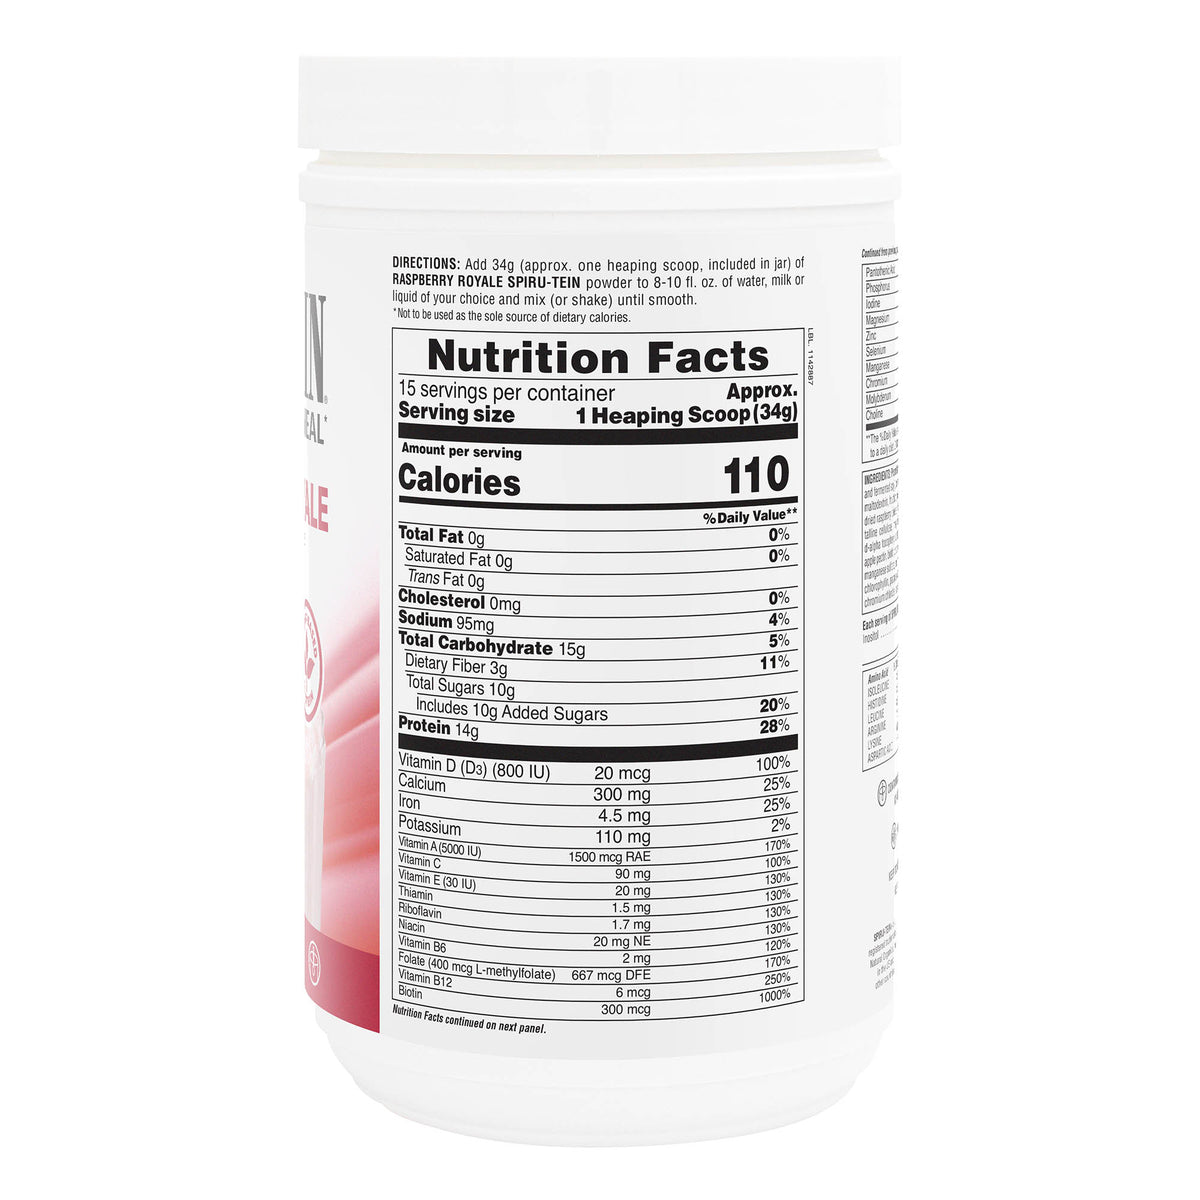 product image of SPIRU-TEIN® High-Protein Energy Meal** - Raspberry Royale containing 1.12 LB